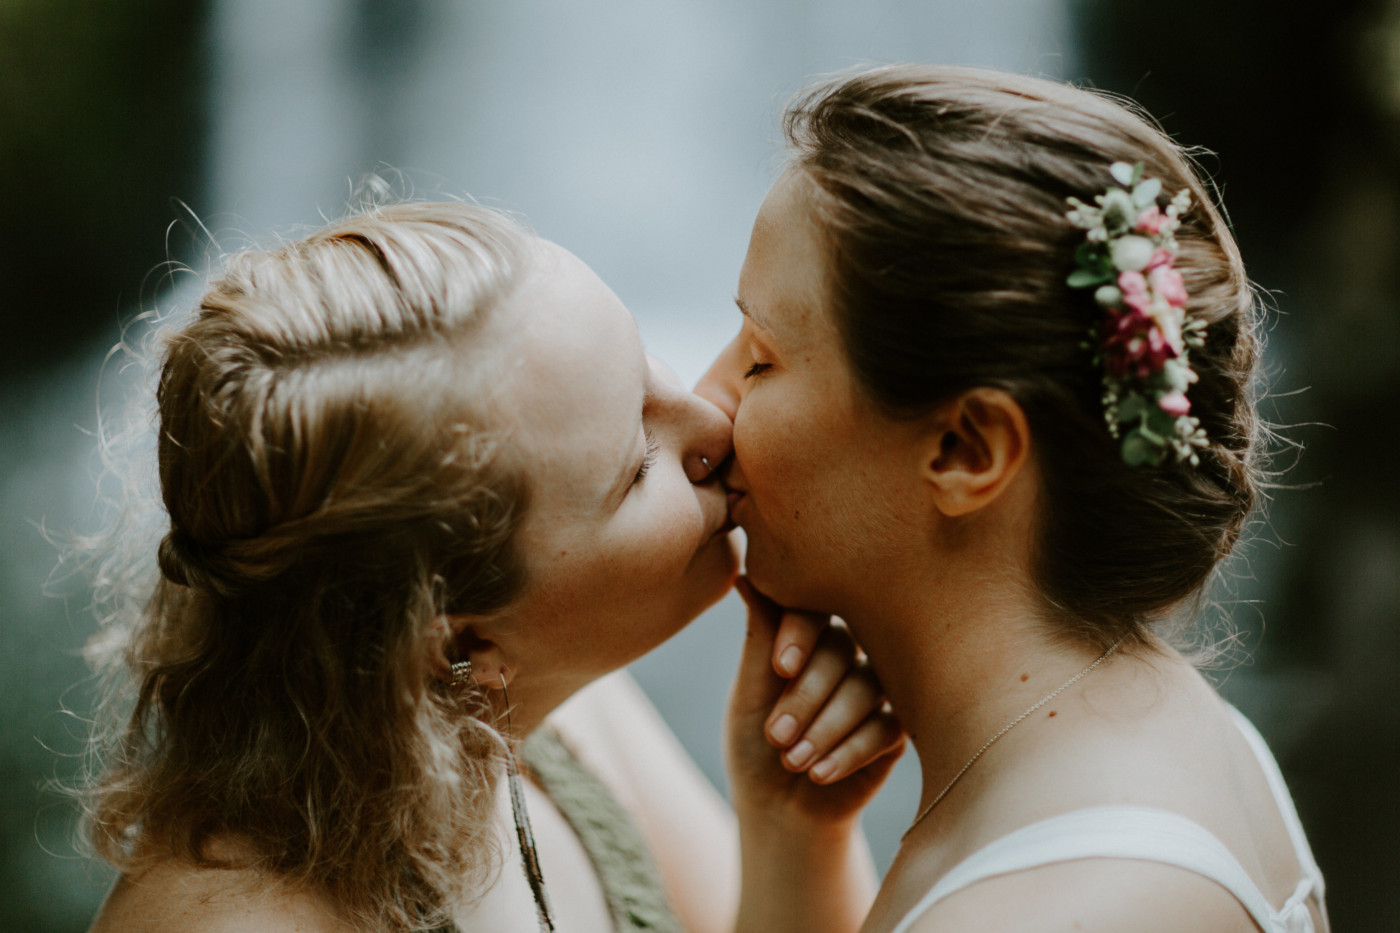 Kate brings Audrey in for a kiss. Elopement wedding photography at Bridal Veil Falls by Sienna Plus Josh.